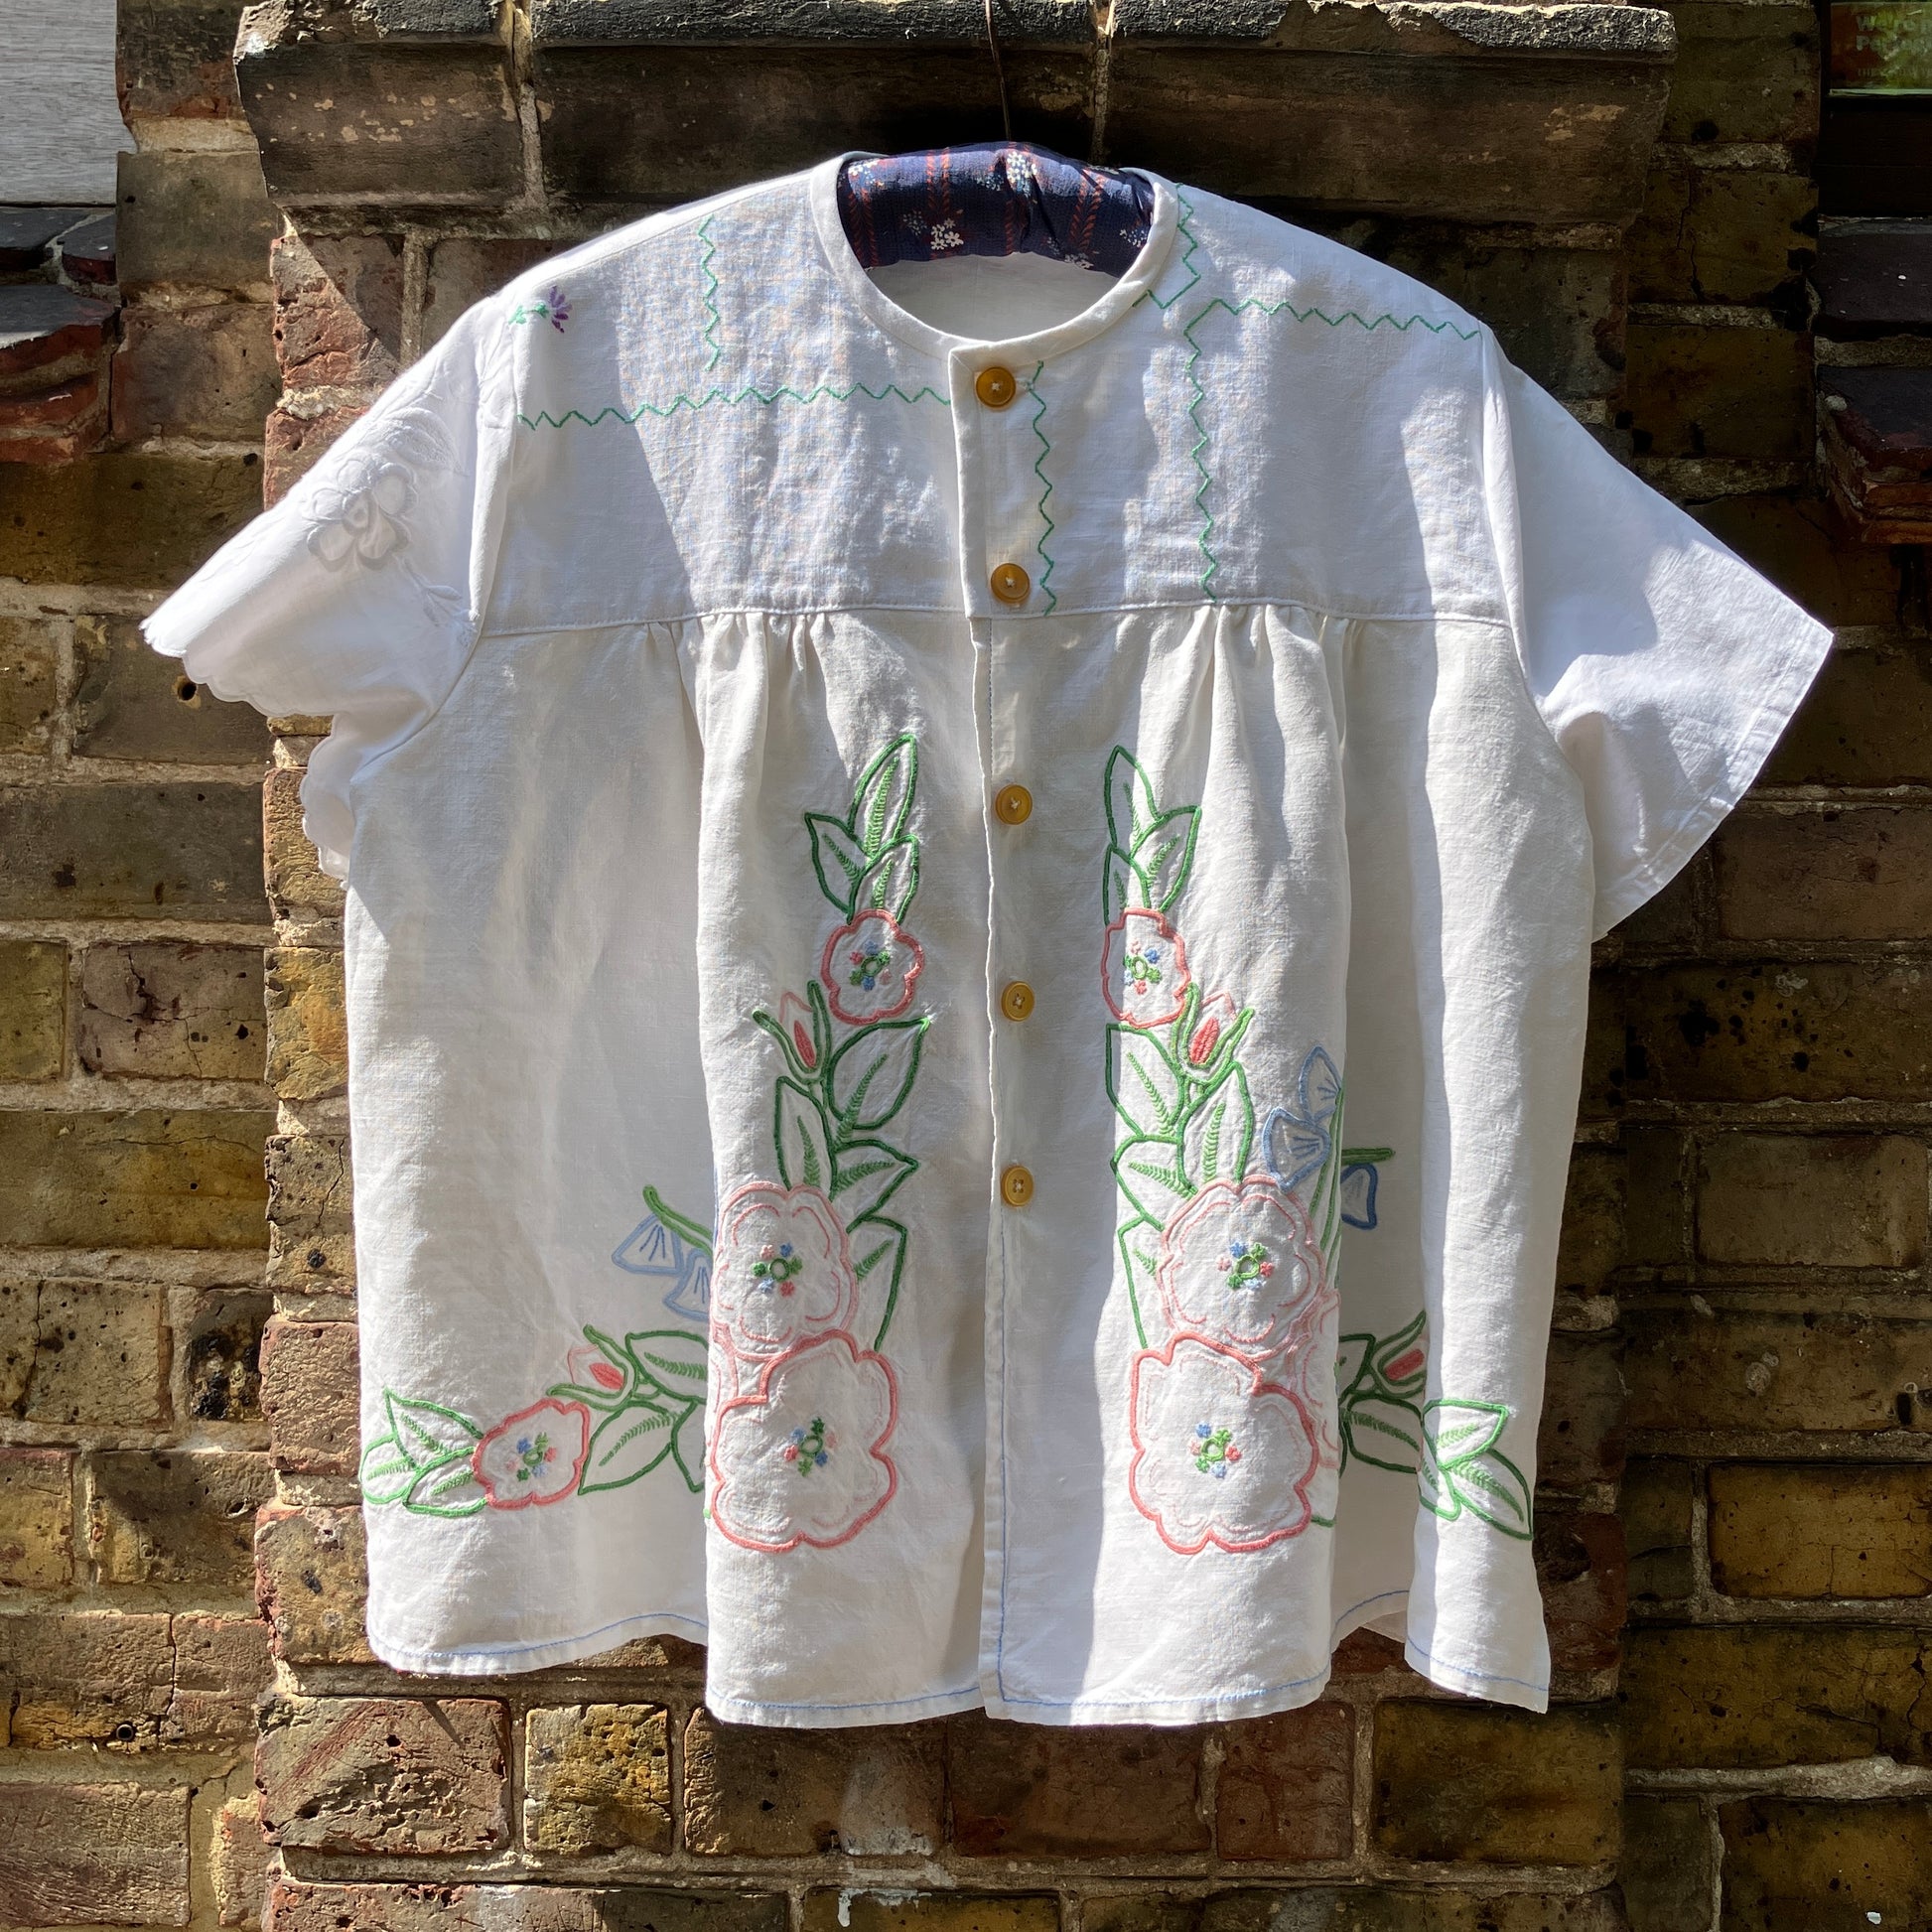 Swingy top made from found repurposed vintage tablecloths with embroidery and cutwork motifs.